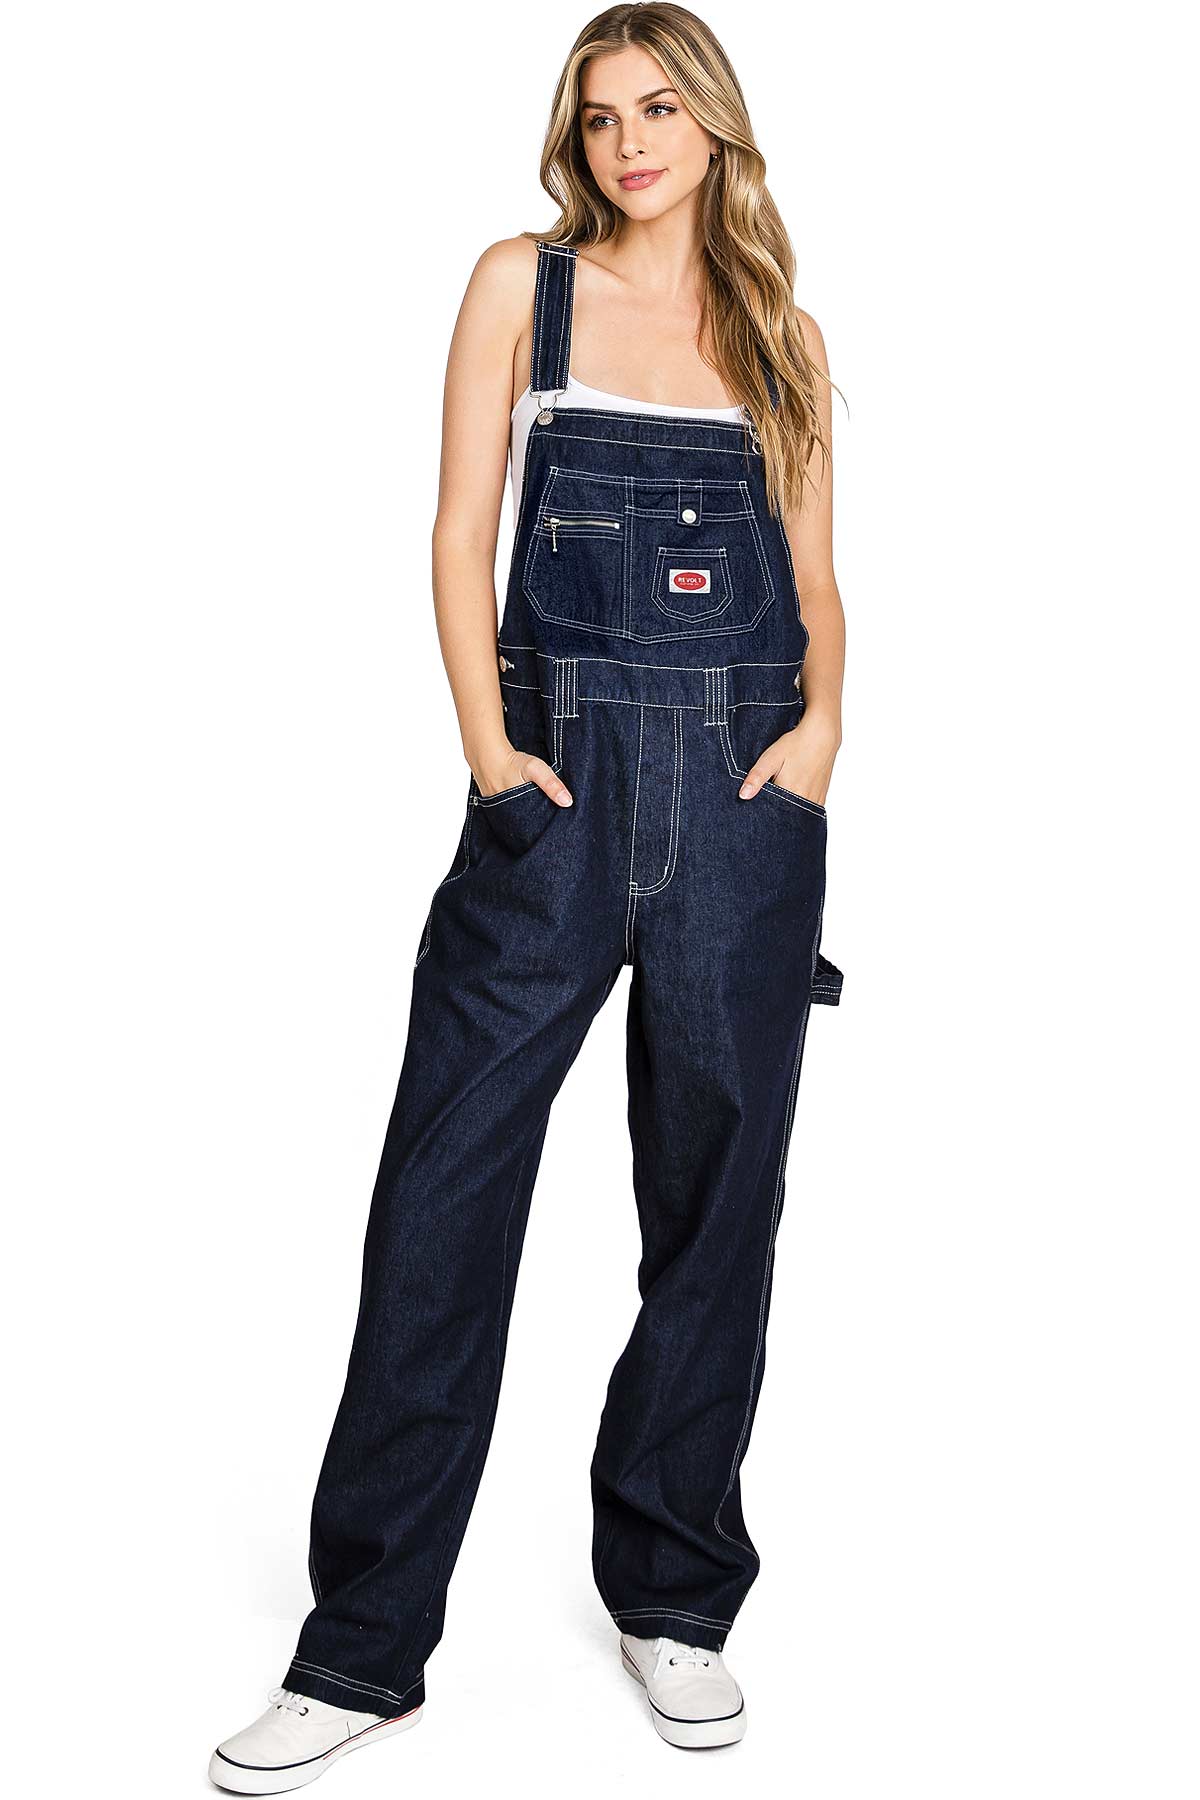 South Side PLUS SIZE Overalls